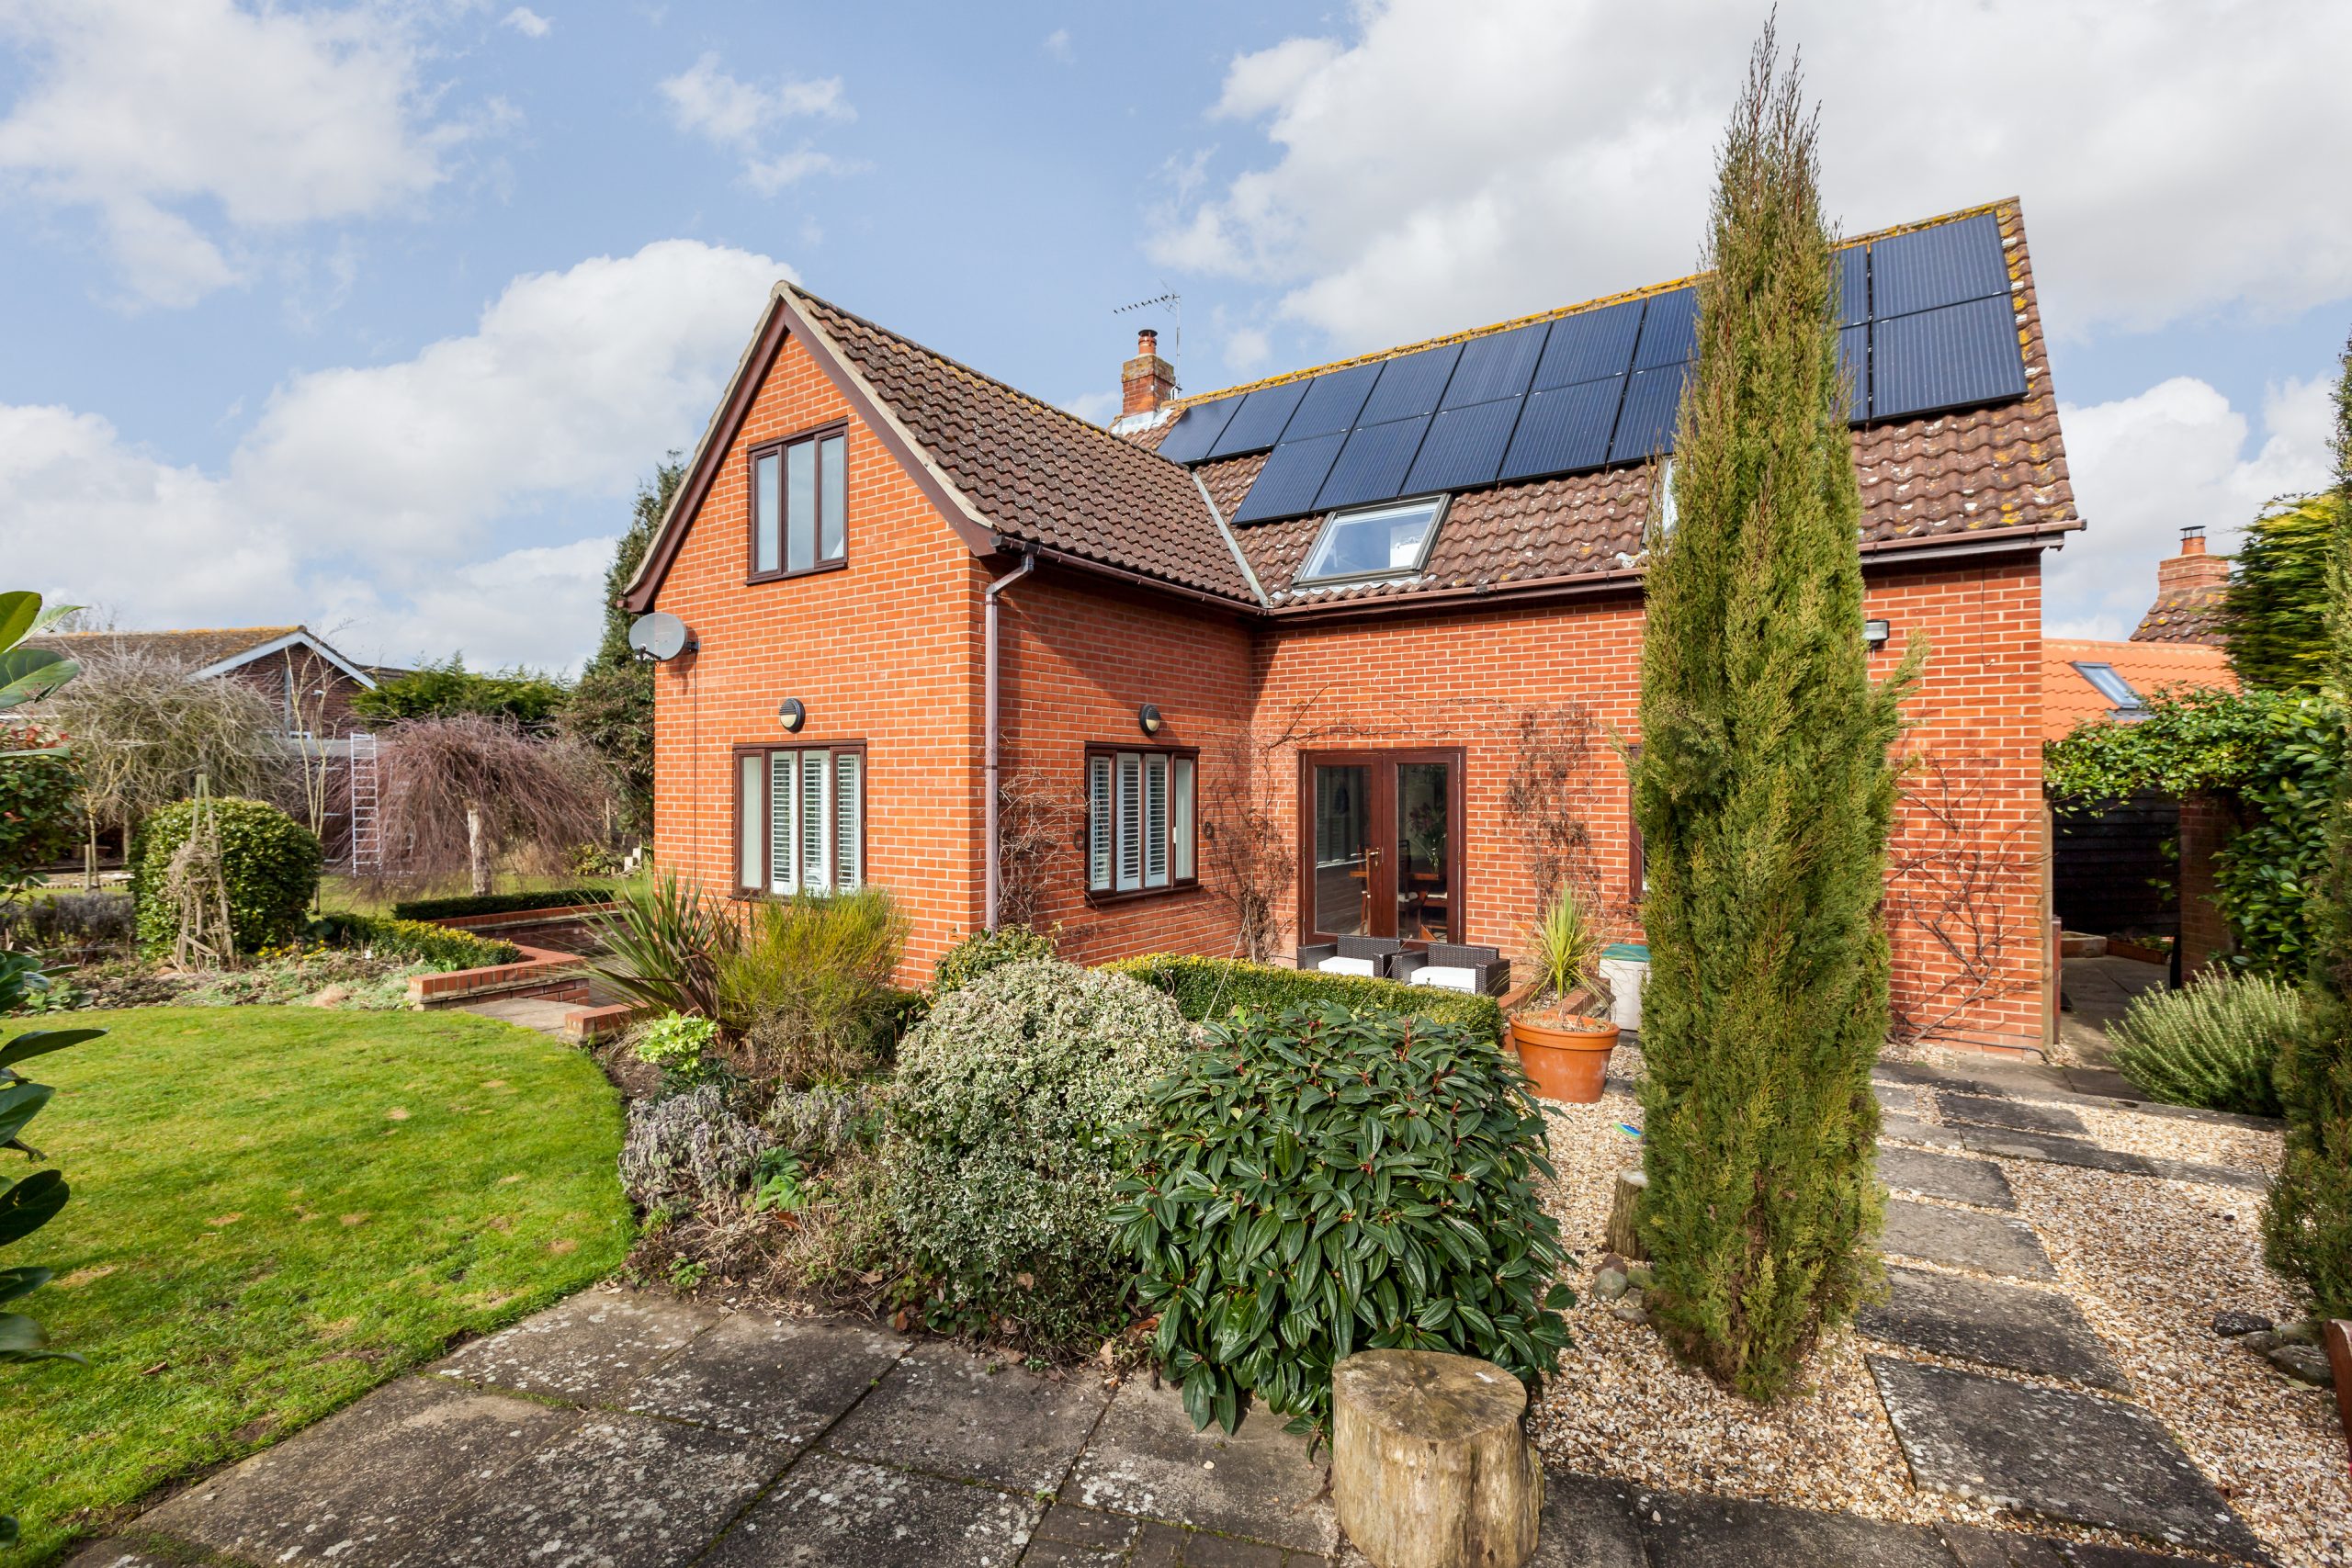 Moulton, Suffolk, England - Feb 19 2015: Traditional detached brick home within landscaped gardens with array of roof mounted photovoltaic solar panels